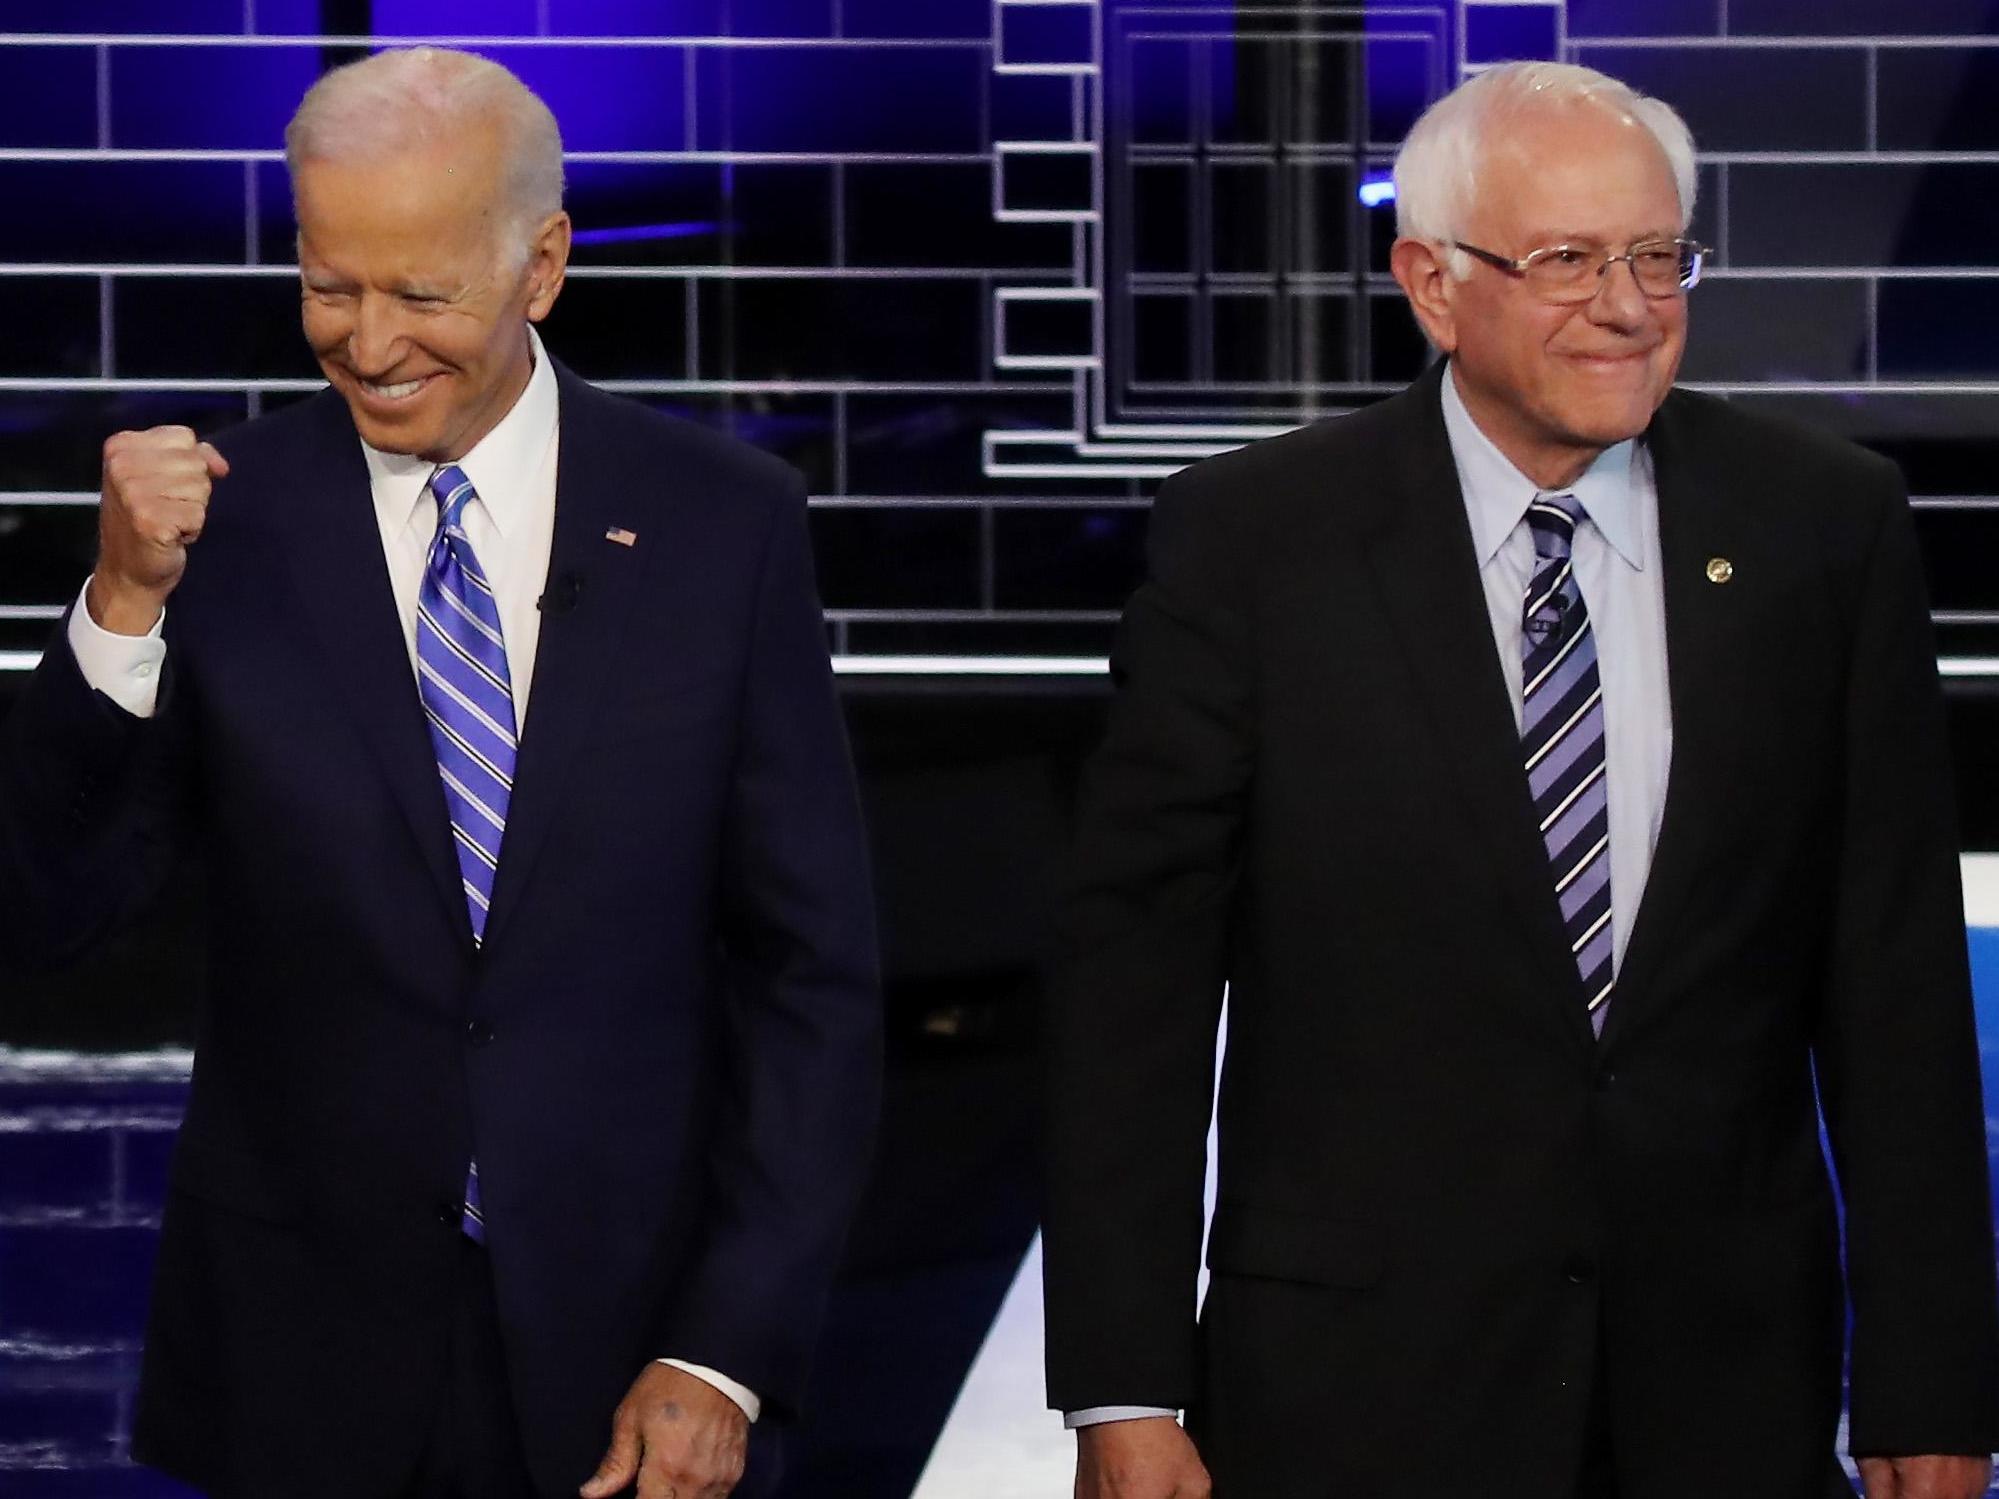 Bernie Sanders won Colorado — but the real story is what happened to Joe Biden in the same state